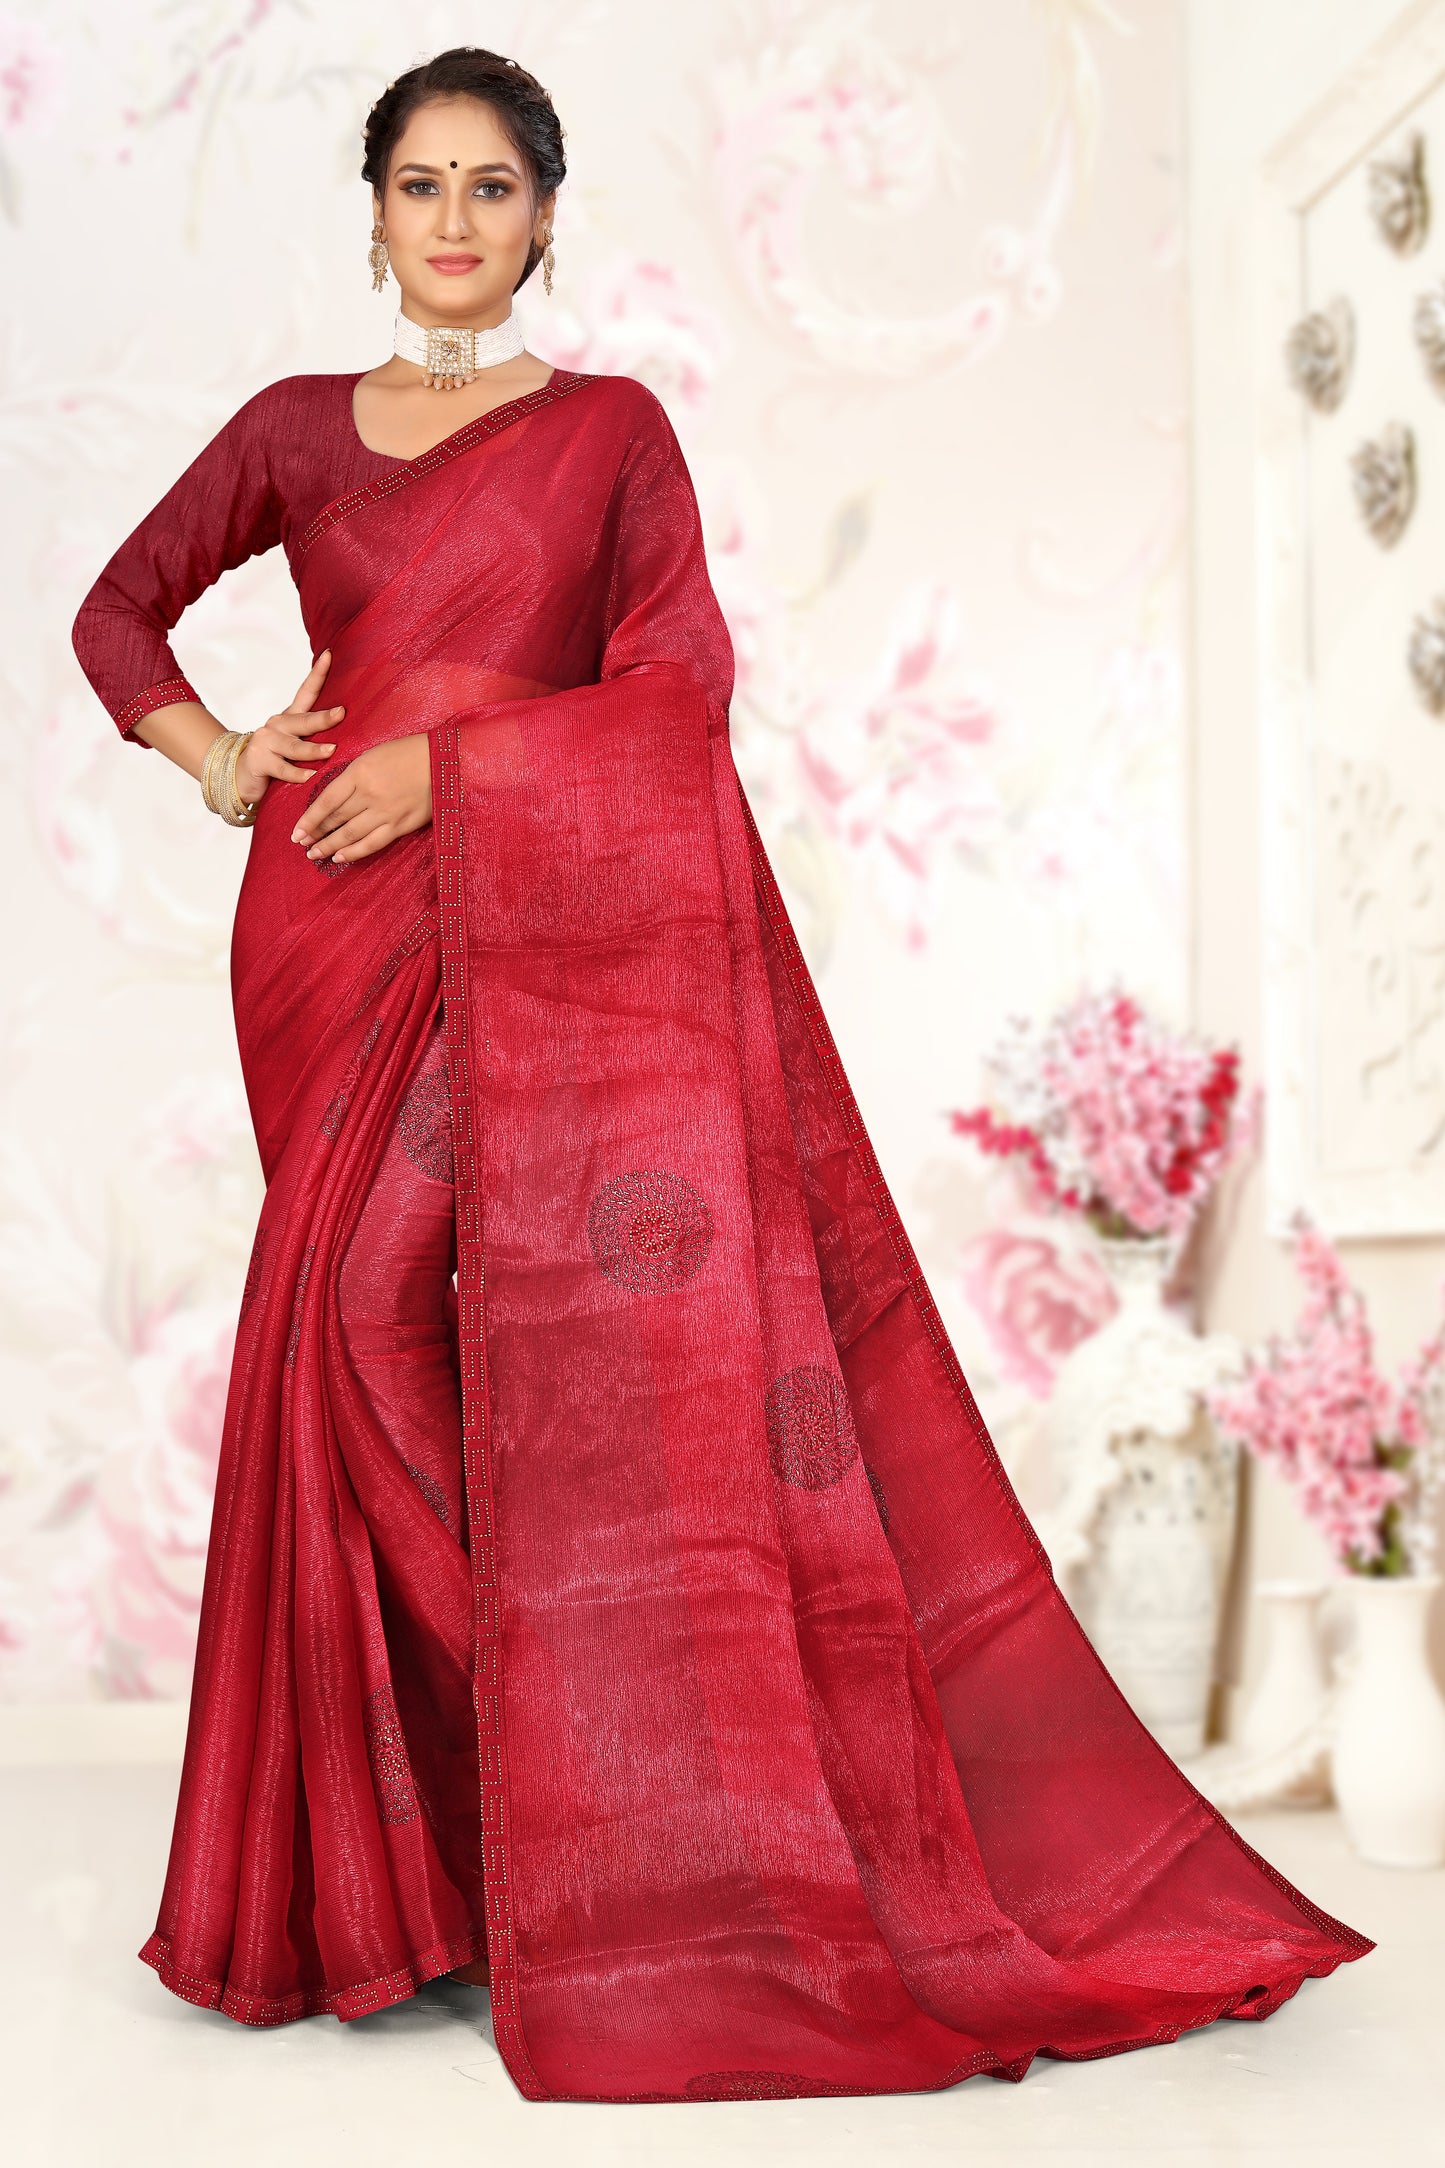 RED CHIFFON SAREE IN 5G FOR DAILY OCCASSION.